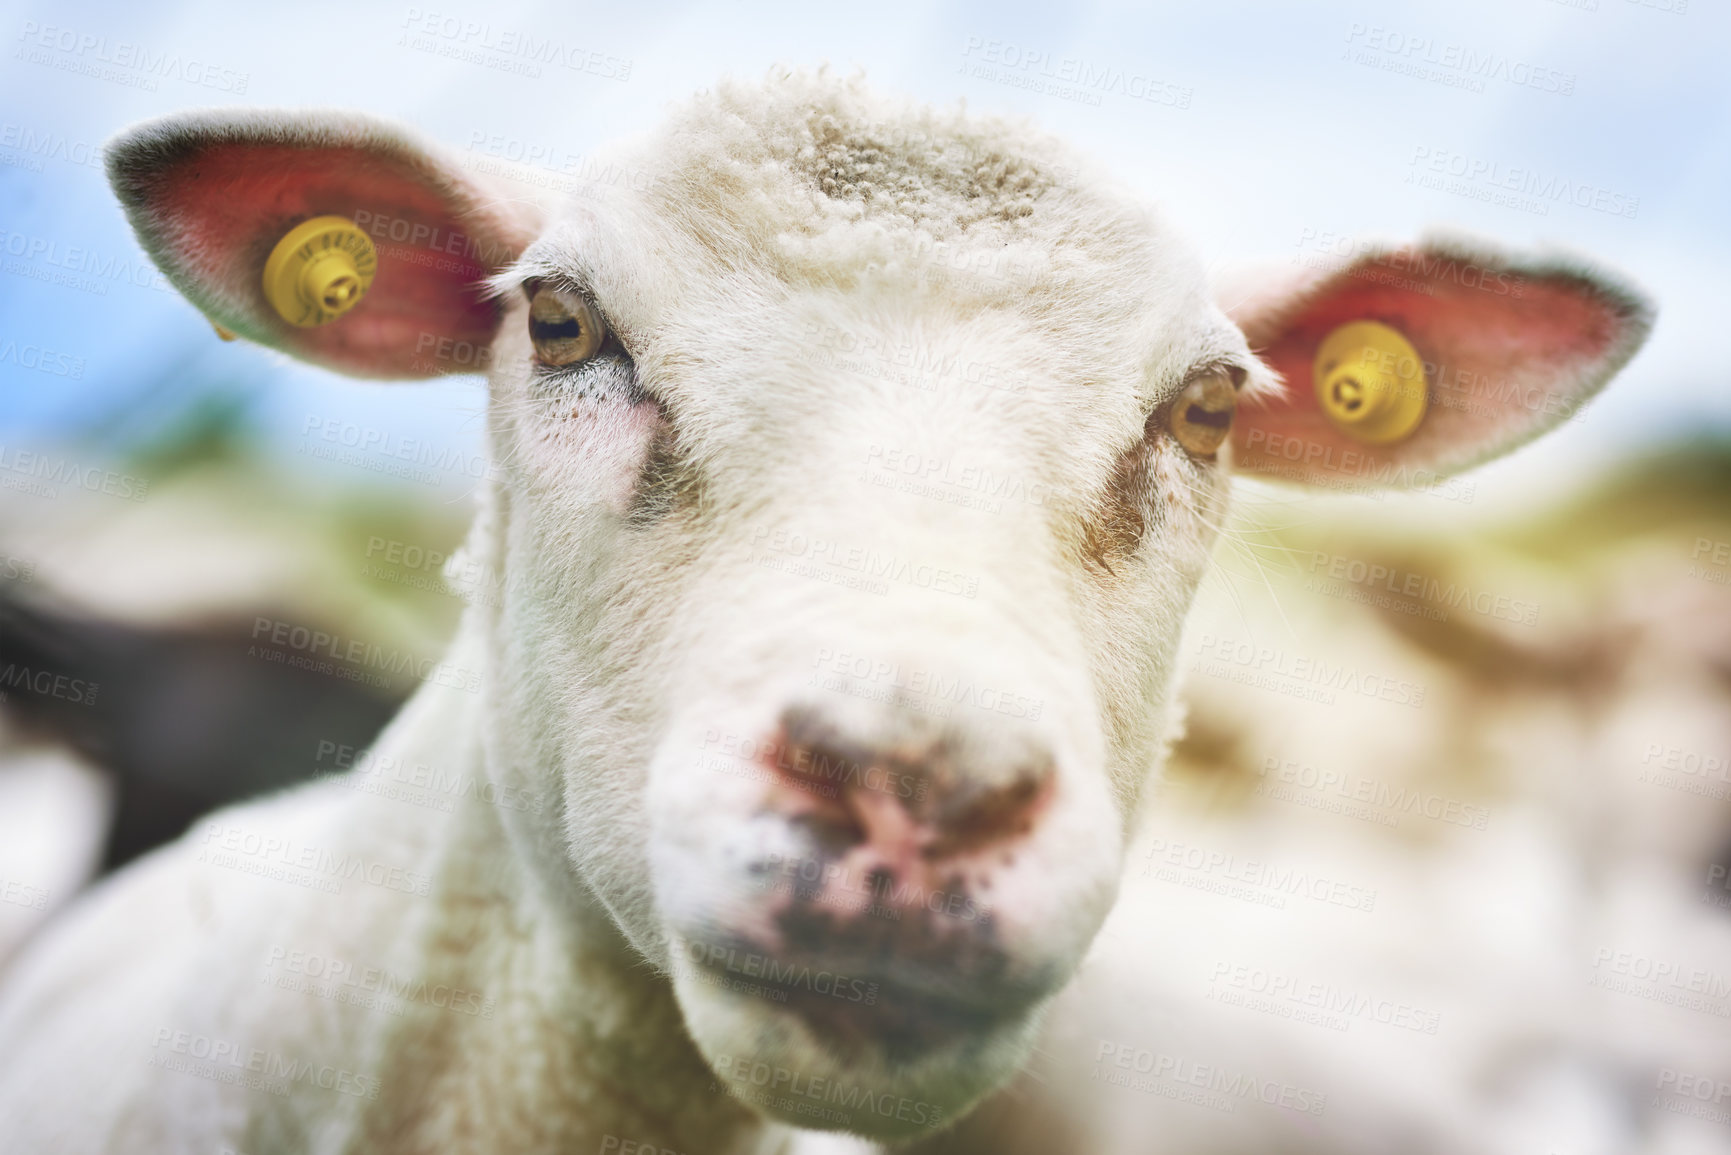 Buy stock photo Cropped shot of sheep on a farm